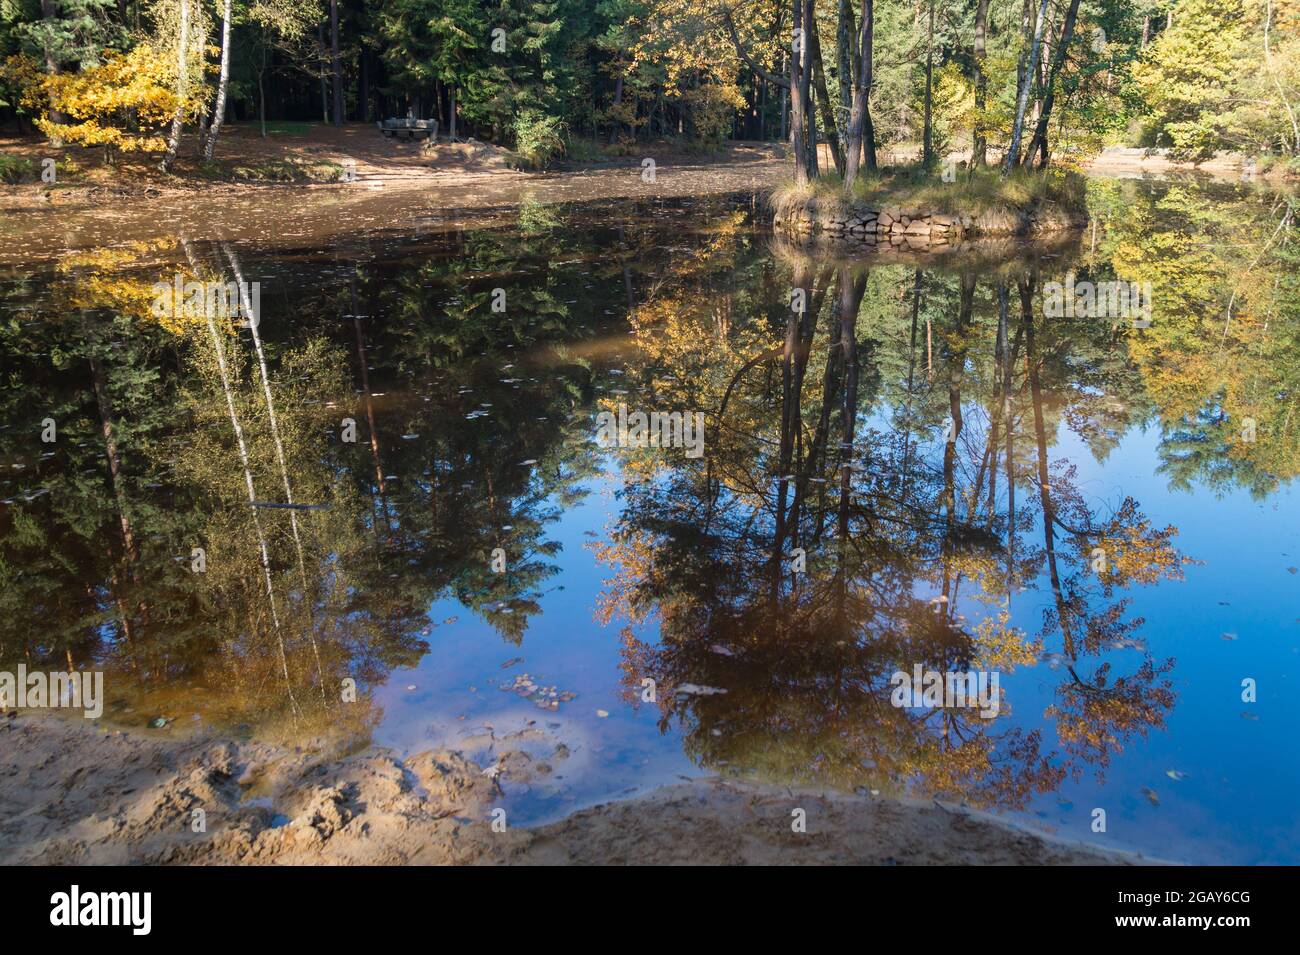 magical reflection of trees and sky in a remote forest lake Stock Photo